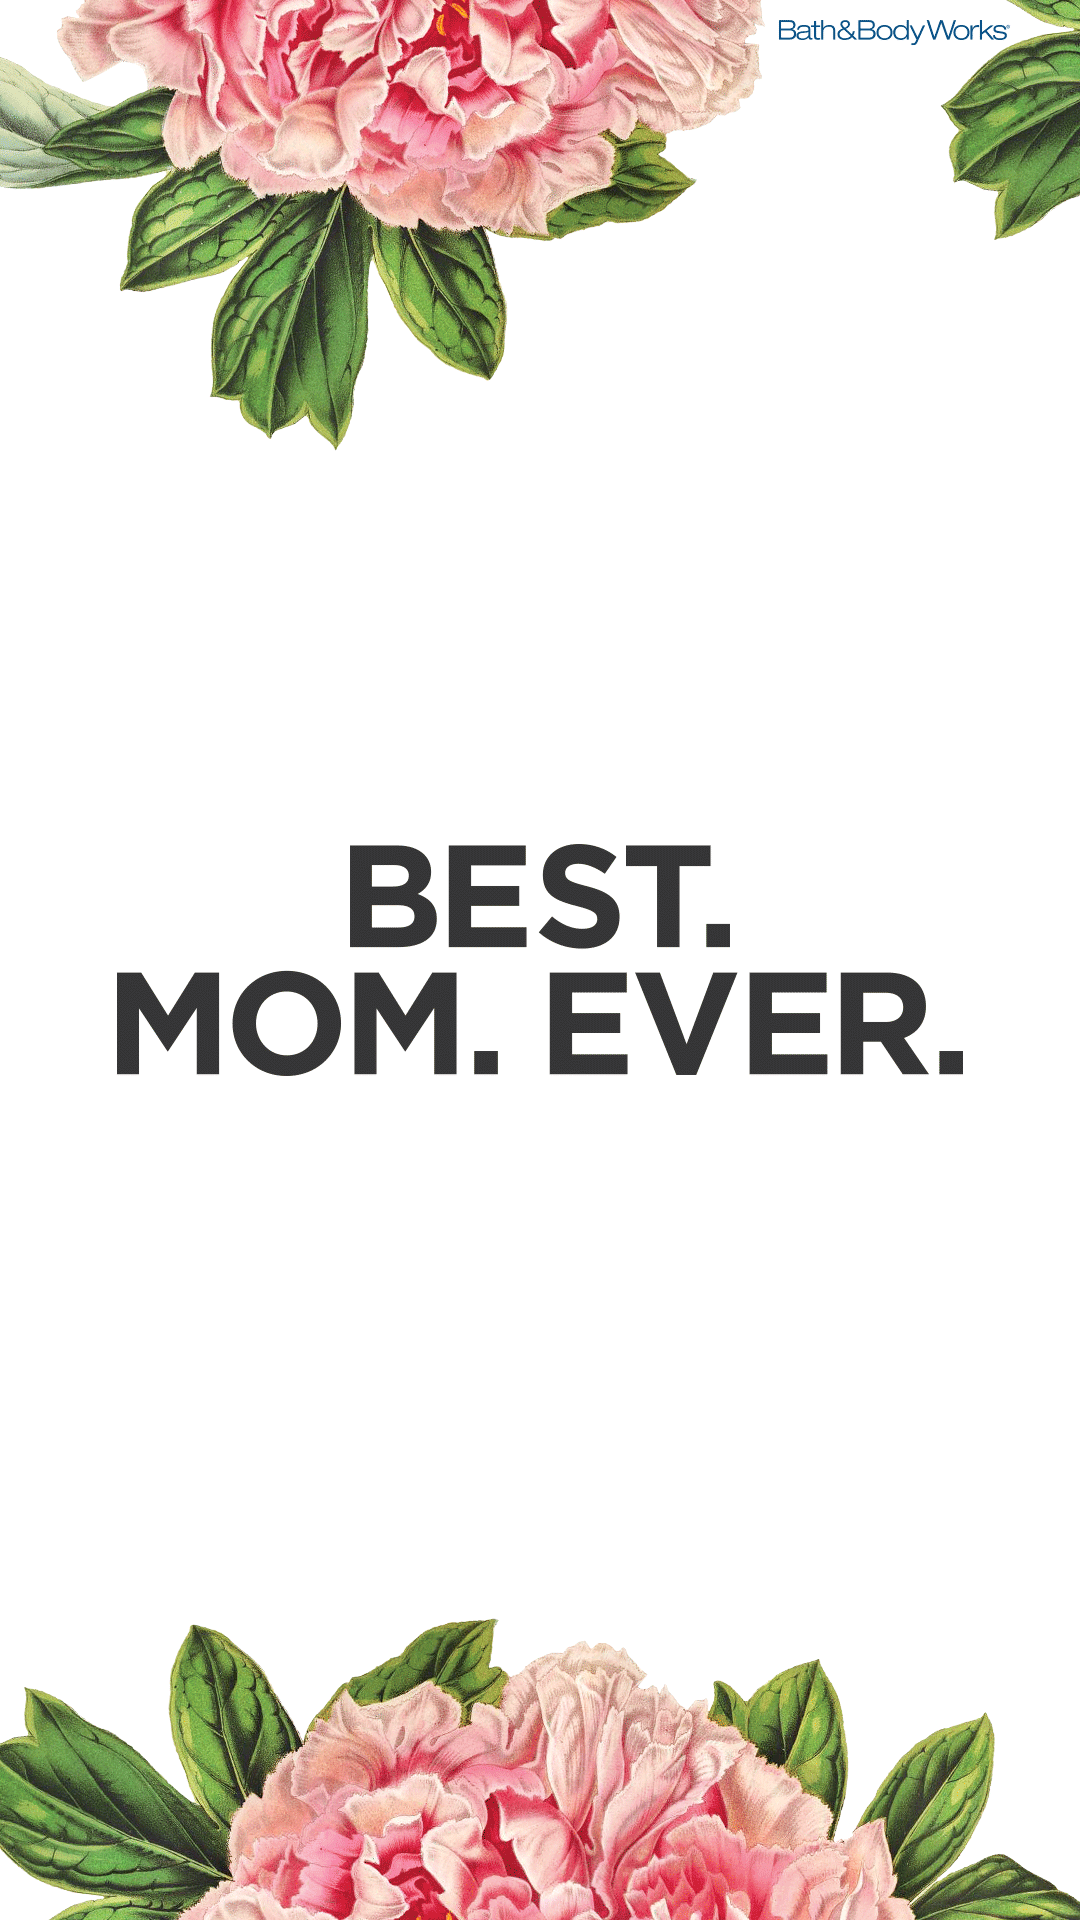 Best Mom Ever iPhone Wallpaper Background. Wallpaper background